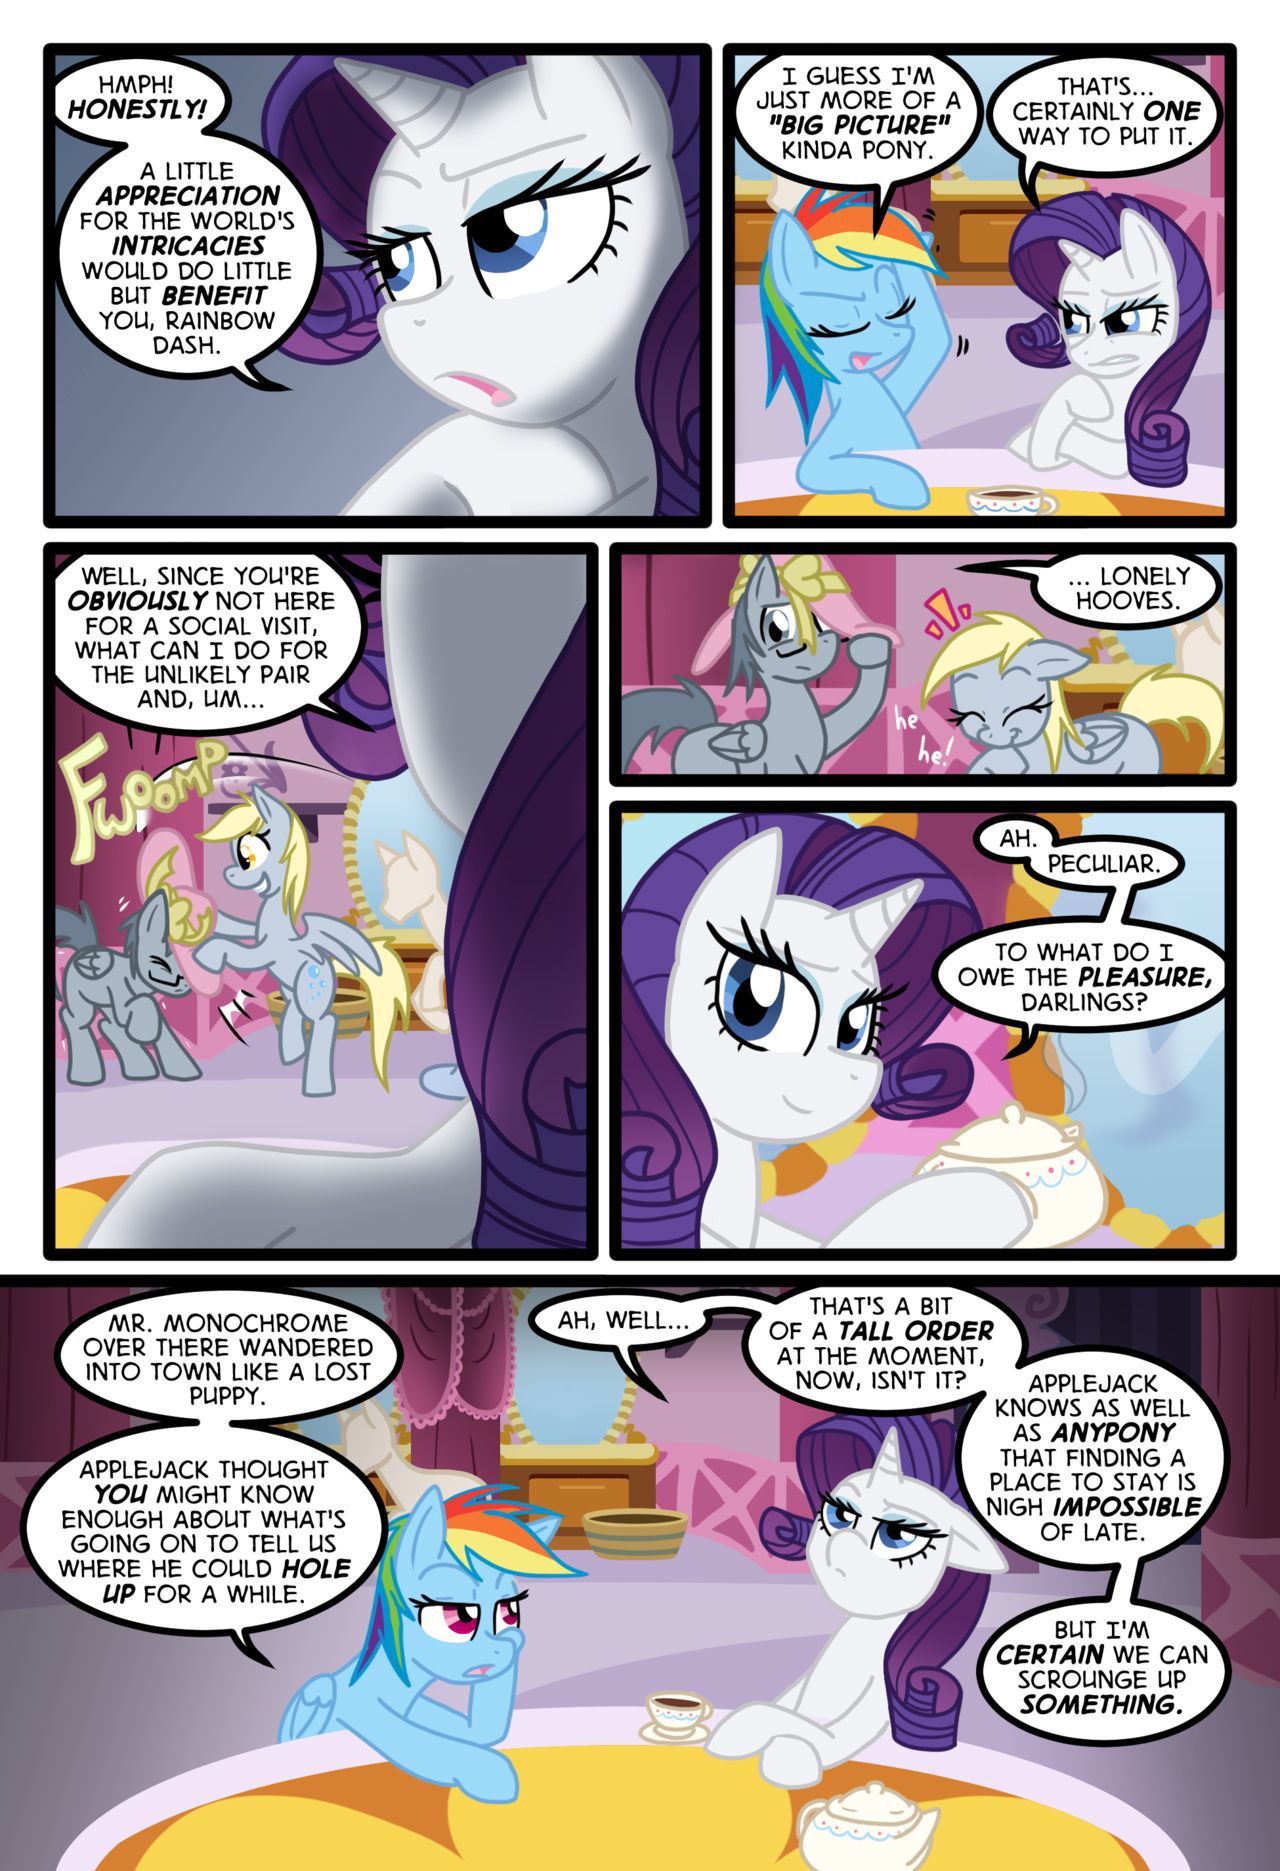 [Zaron] Lonely Hooves (My Little Pony Friendship Is Magic) [Ongoing] 31